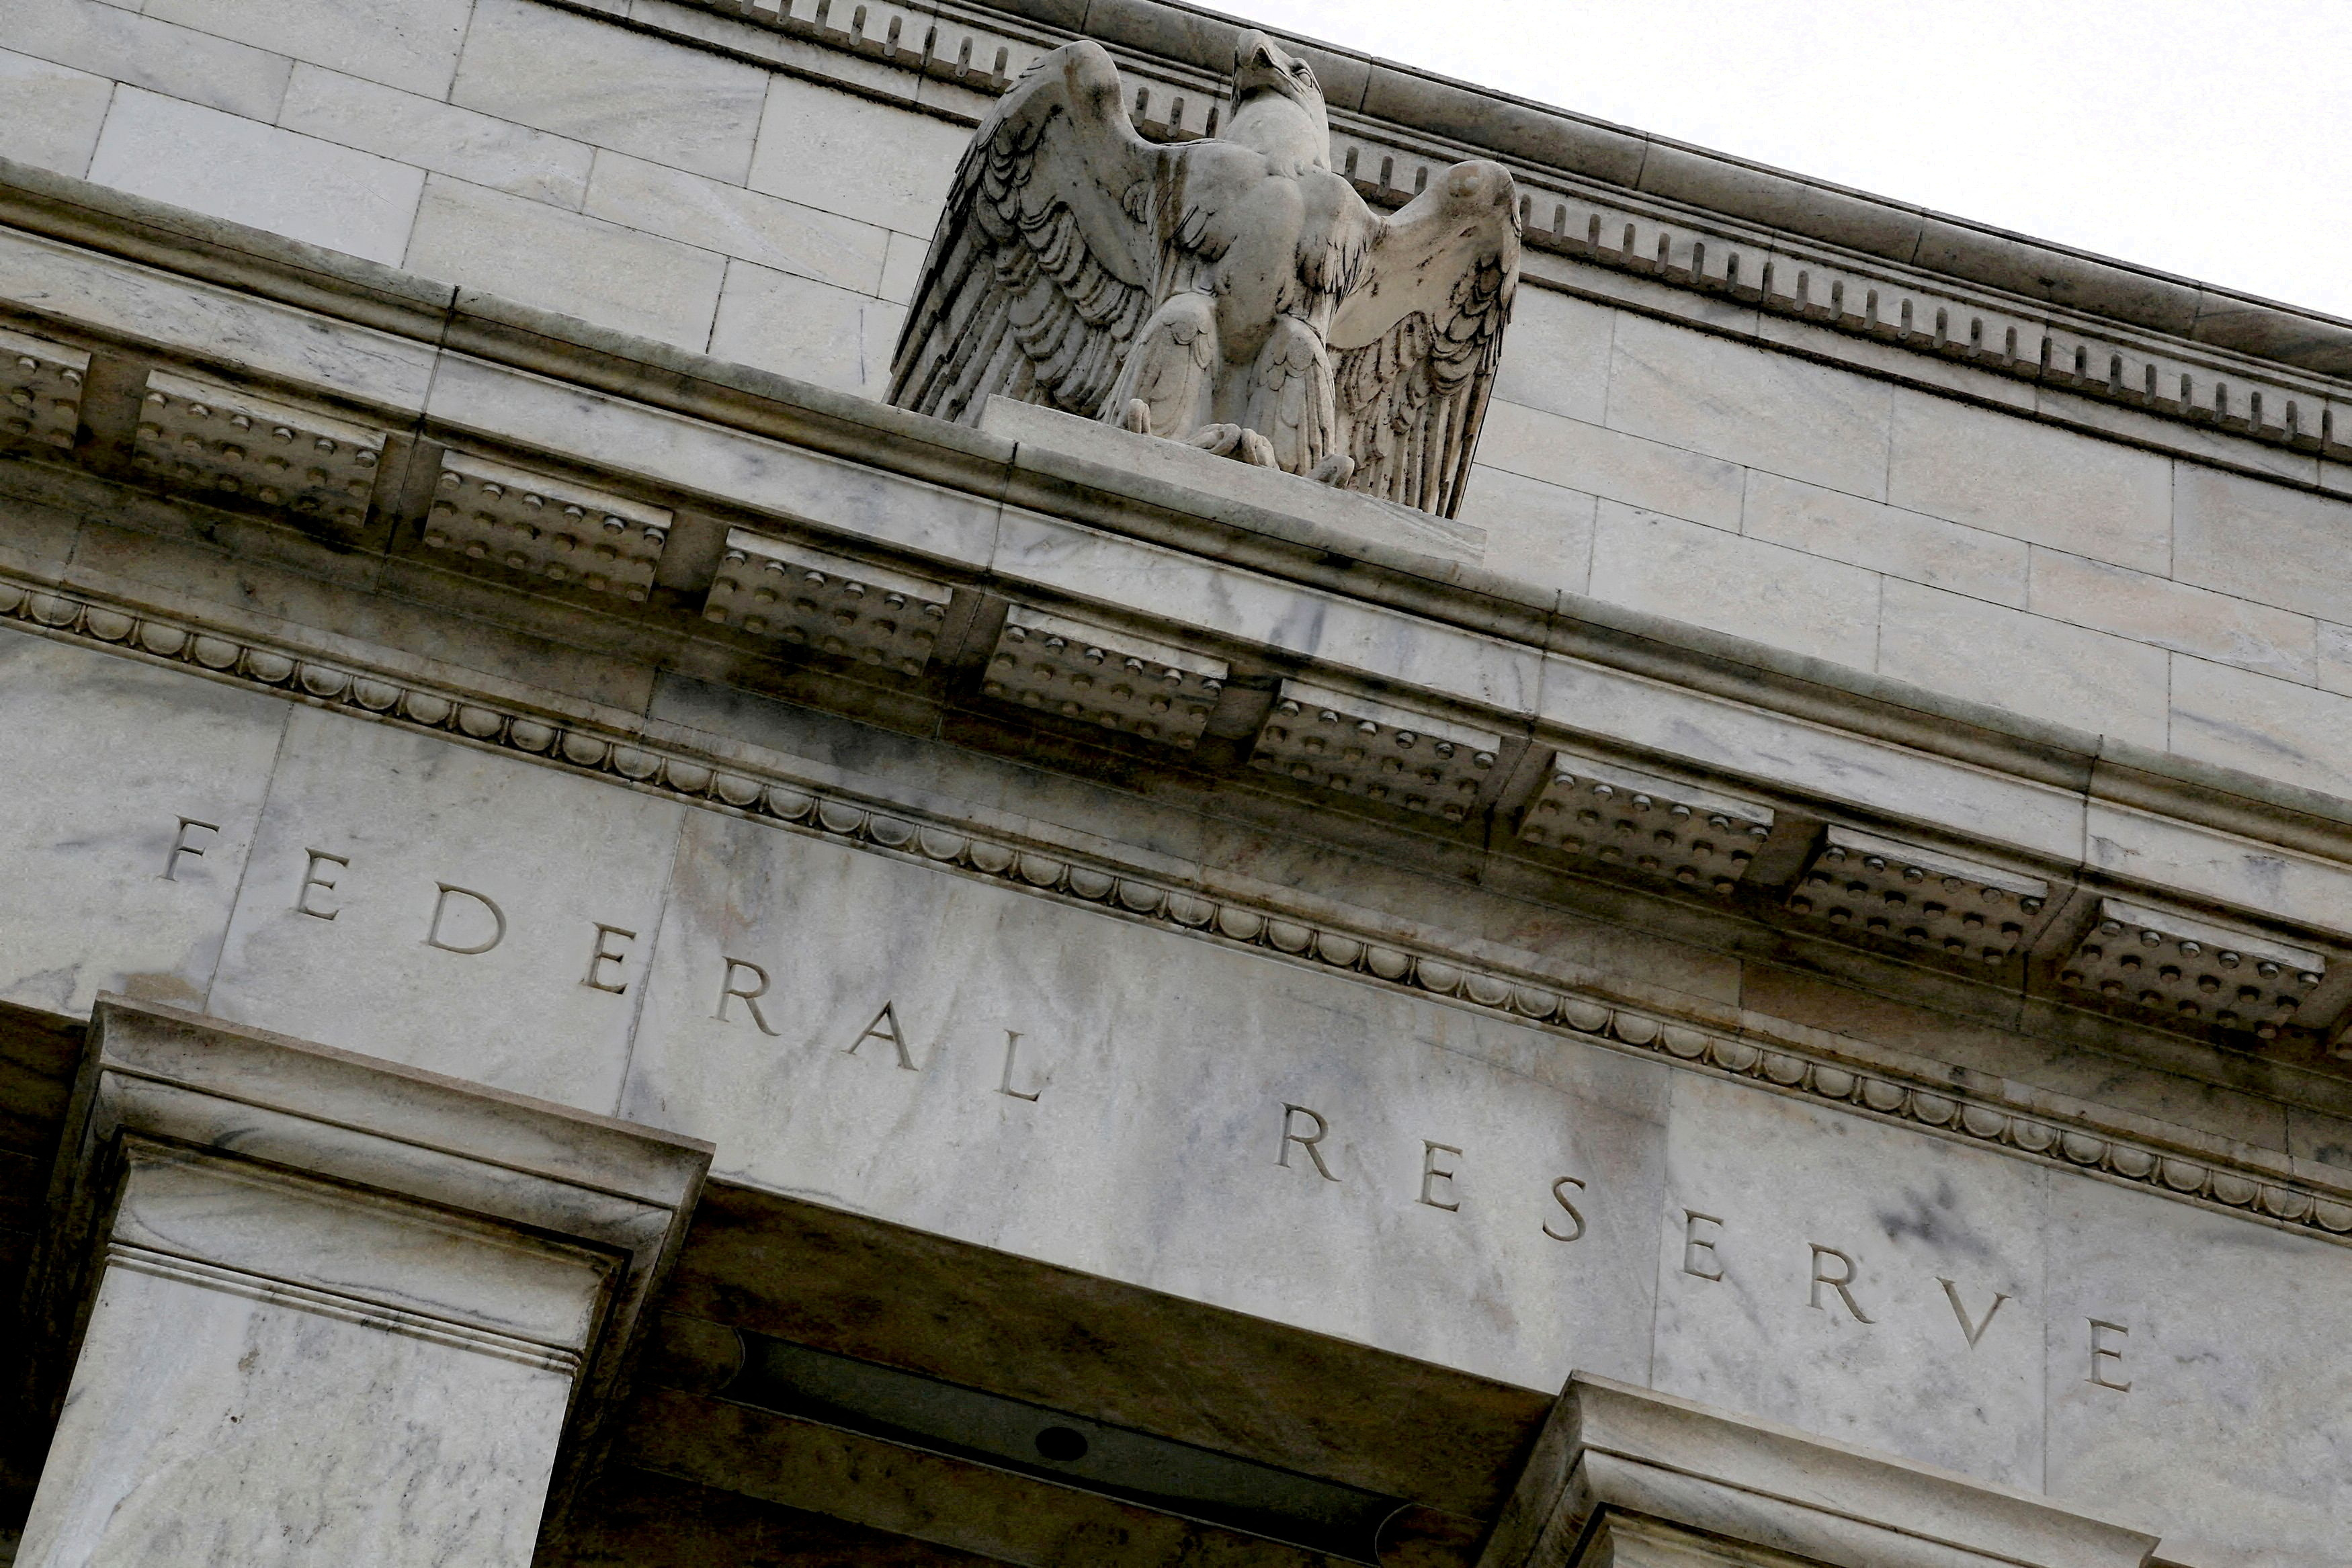 An eagle tops the U.S. Federal Reserve building's facade in Washington